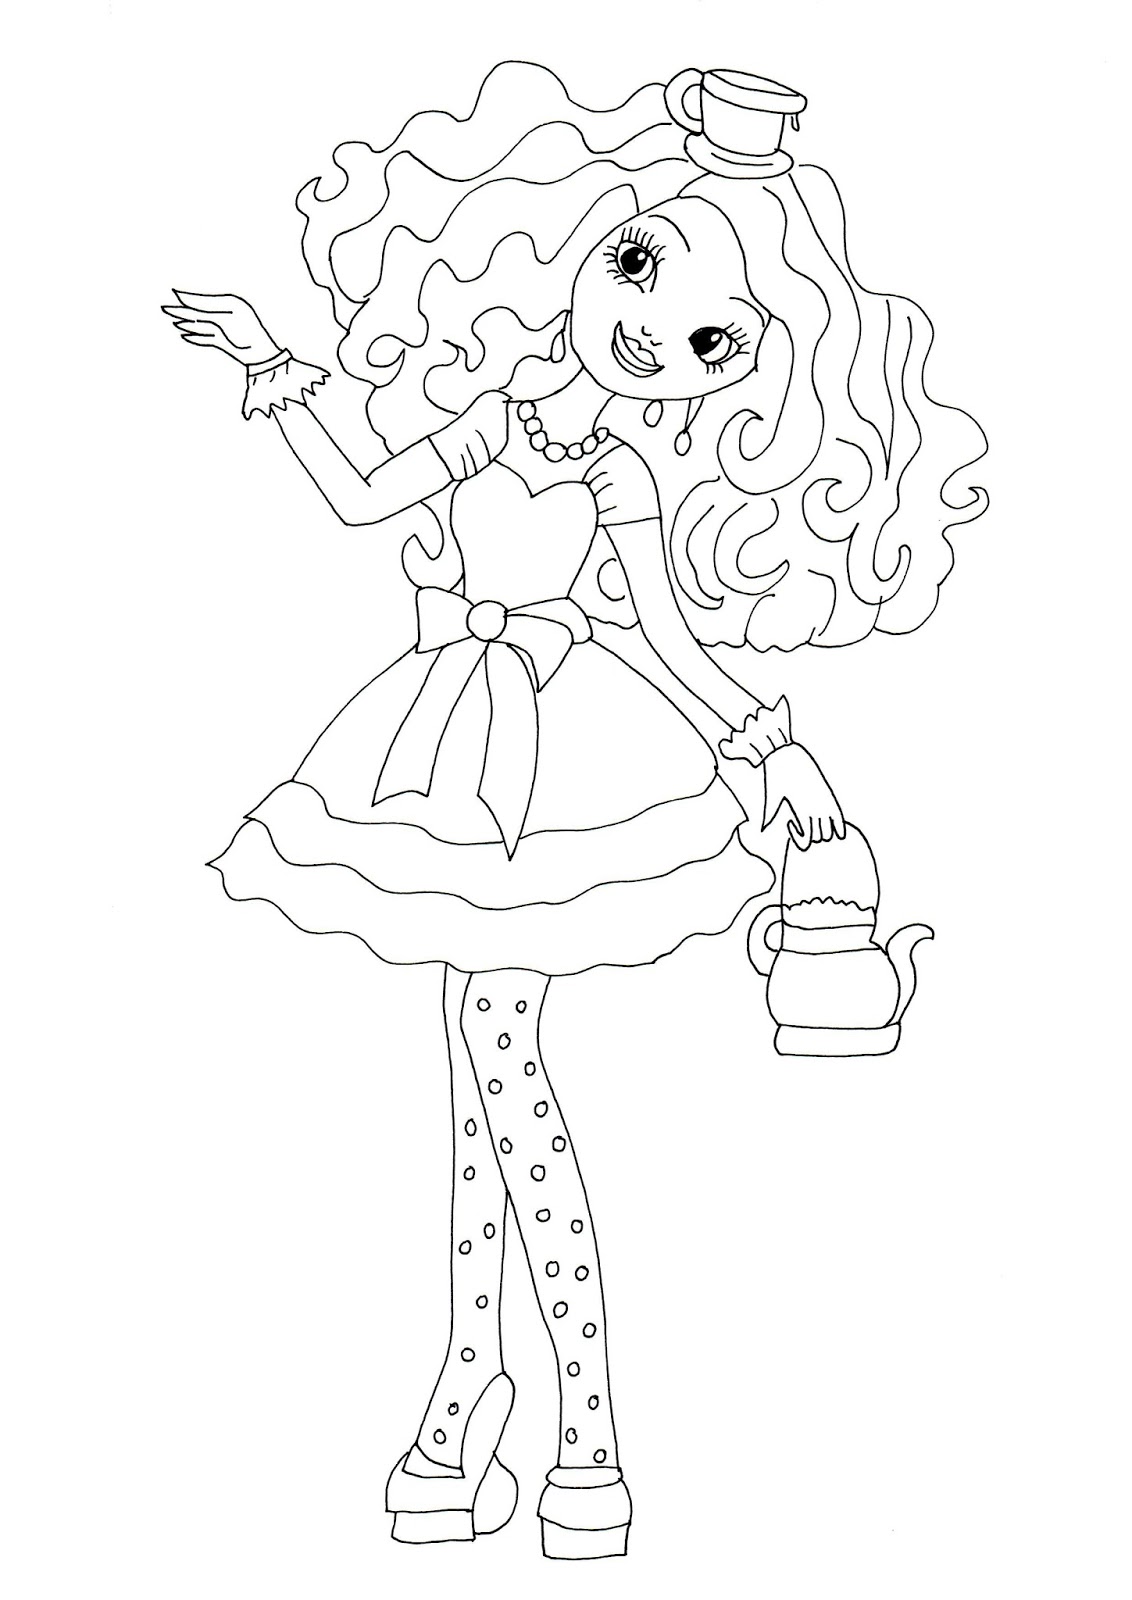 Free Ever After High Coloring Pages: February 2014